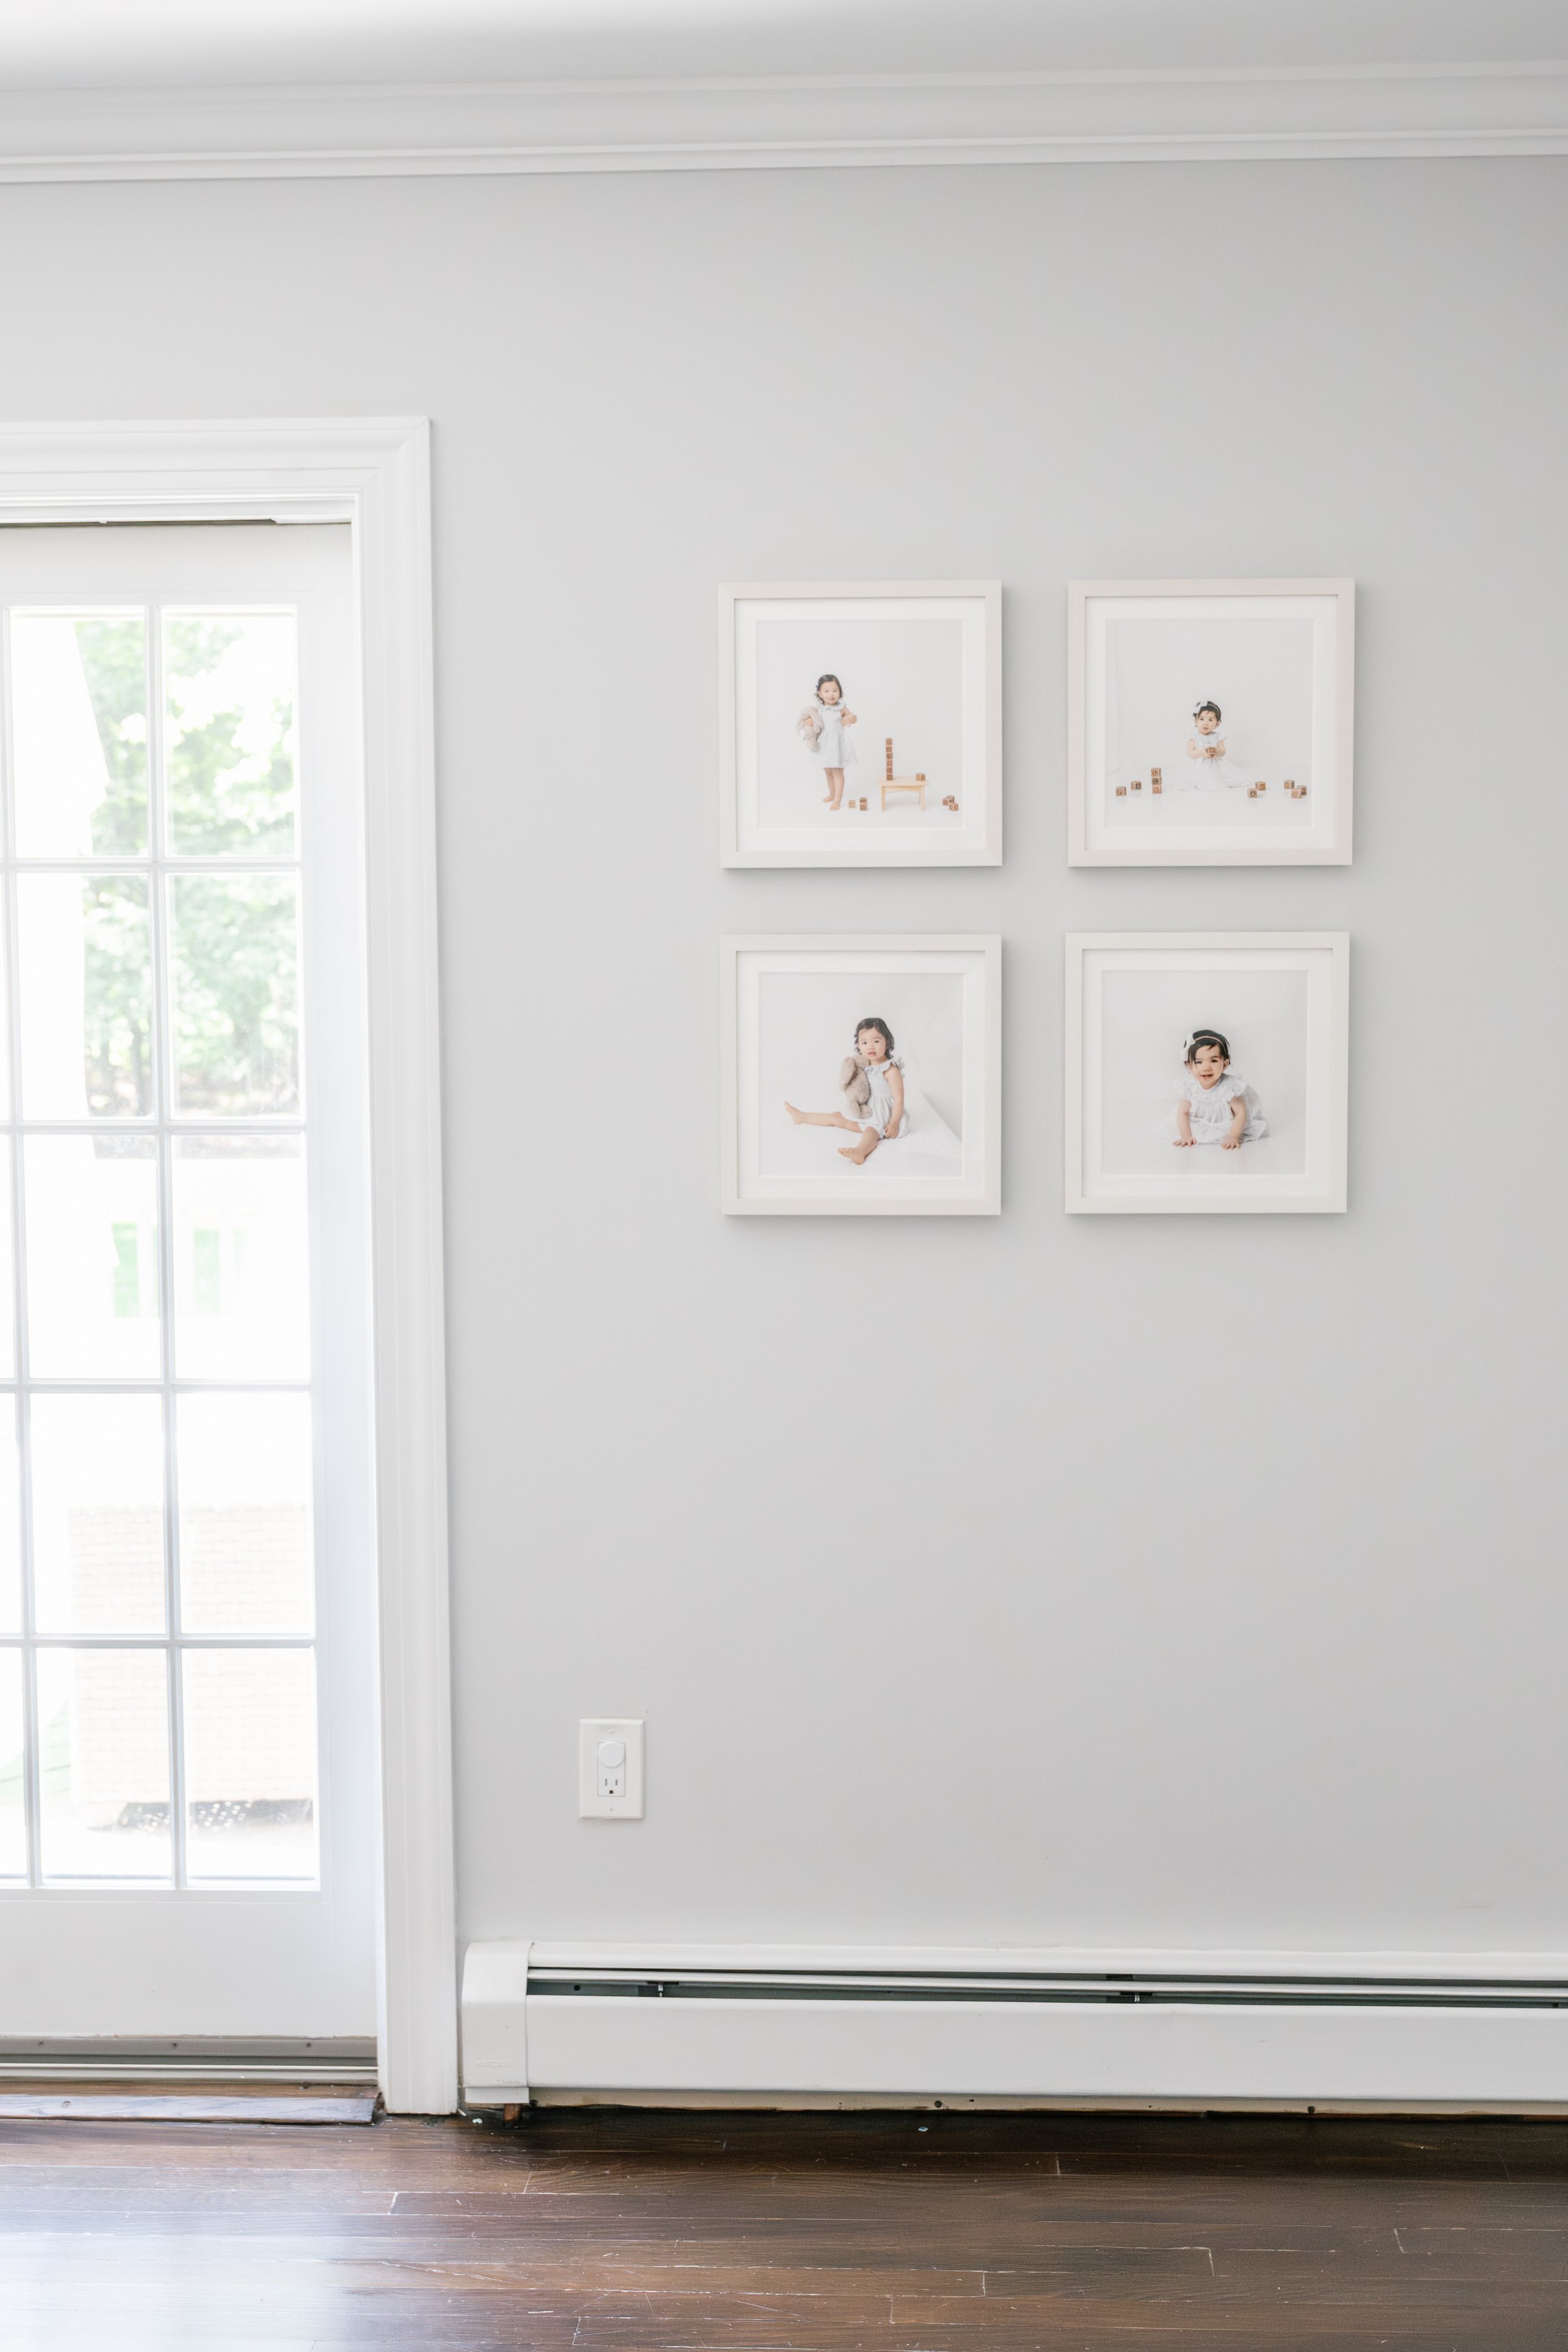   Square gallery wall with four framed photos with identical frames, filled with photos of a toddler and a baby playing with toys. #EssexCountyFamilyPhotographer #MorrisCountyFamilyPhotographer #NorthernNewJerseyFamilyPhotographer #NorthernNewJerseyP